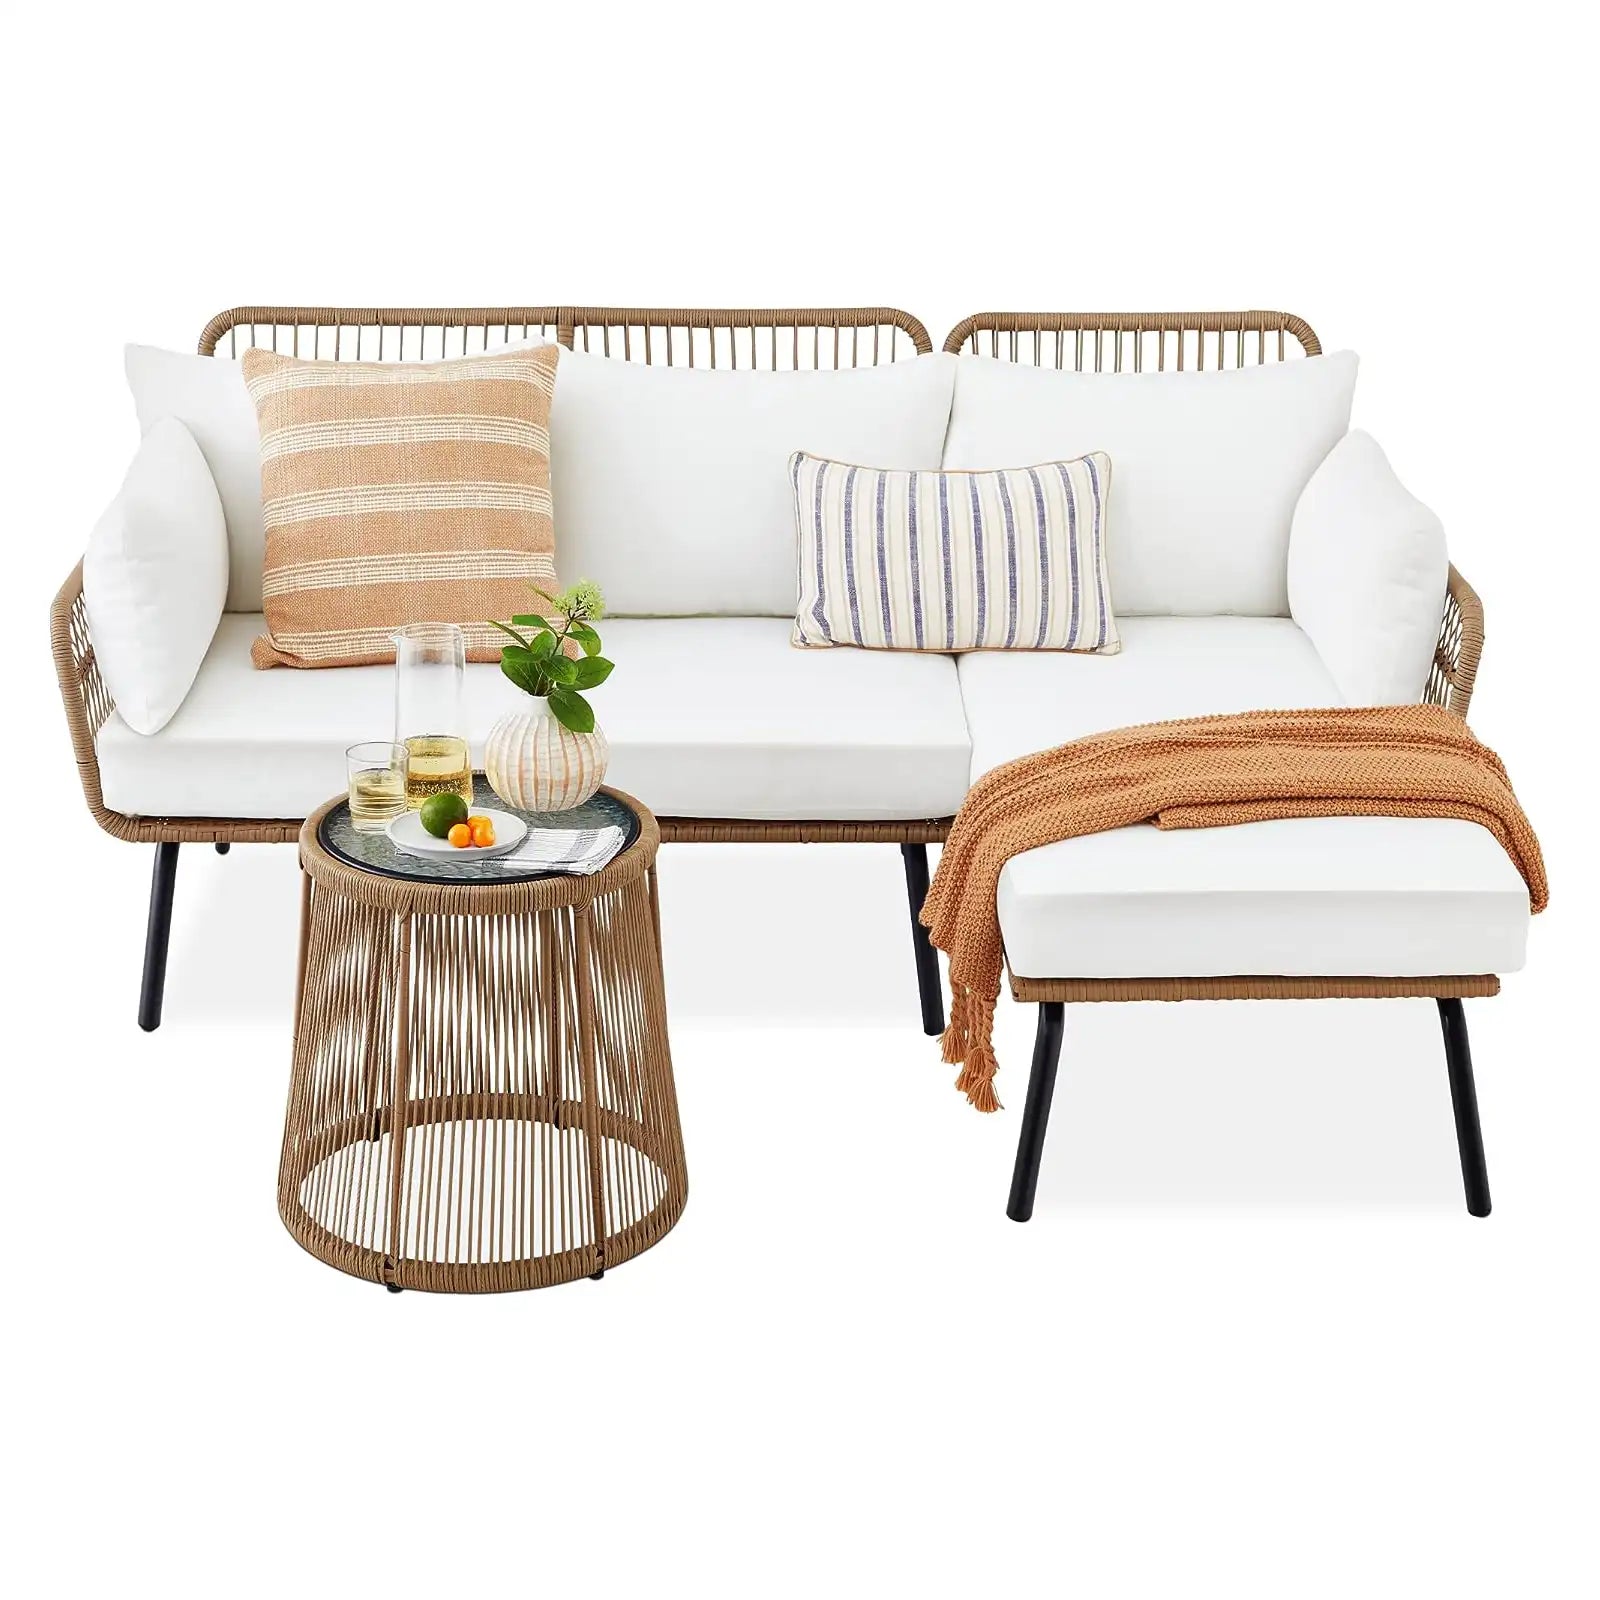 Outdoor Rope Woven Sectional Patio Furniture L-Shaped Conversation Sofa Set for Backyard, Porch w/Thick Cushions, Detachable Lounger, Side Table